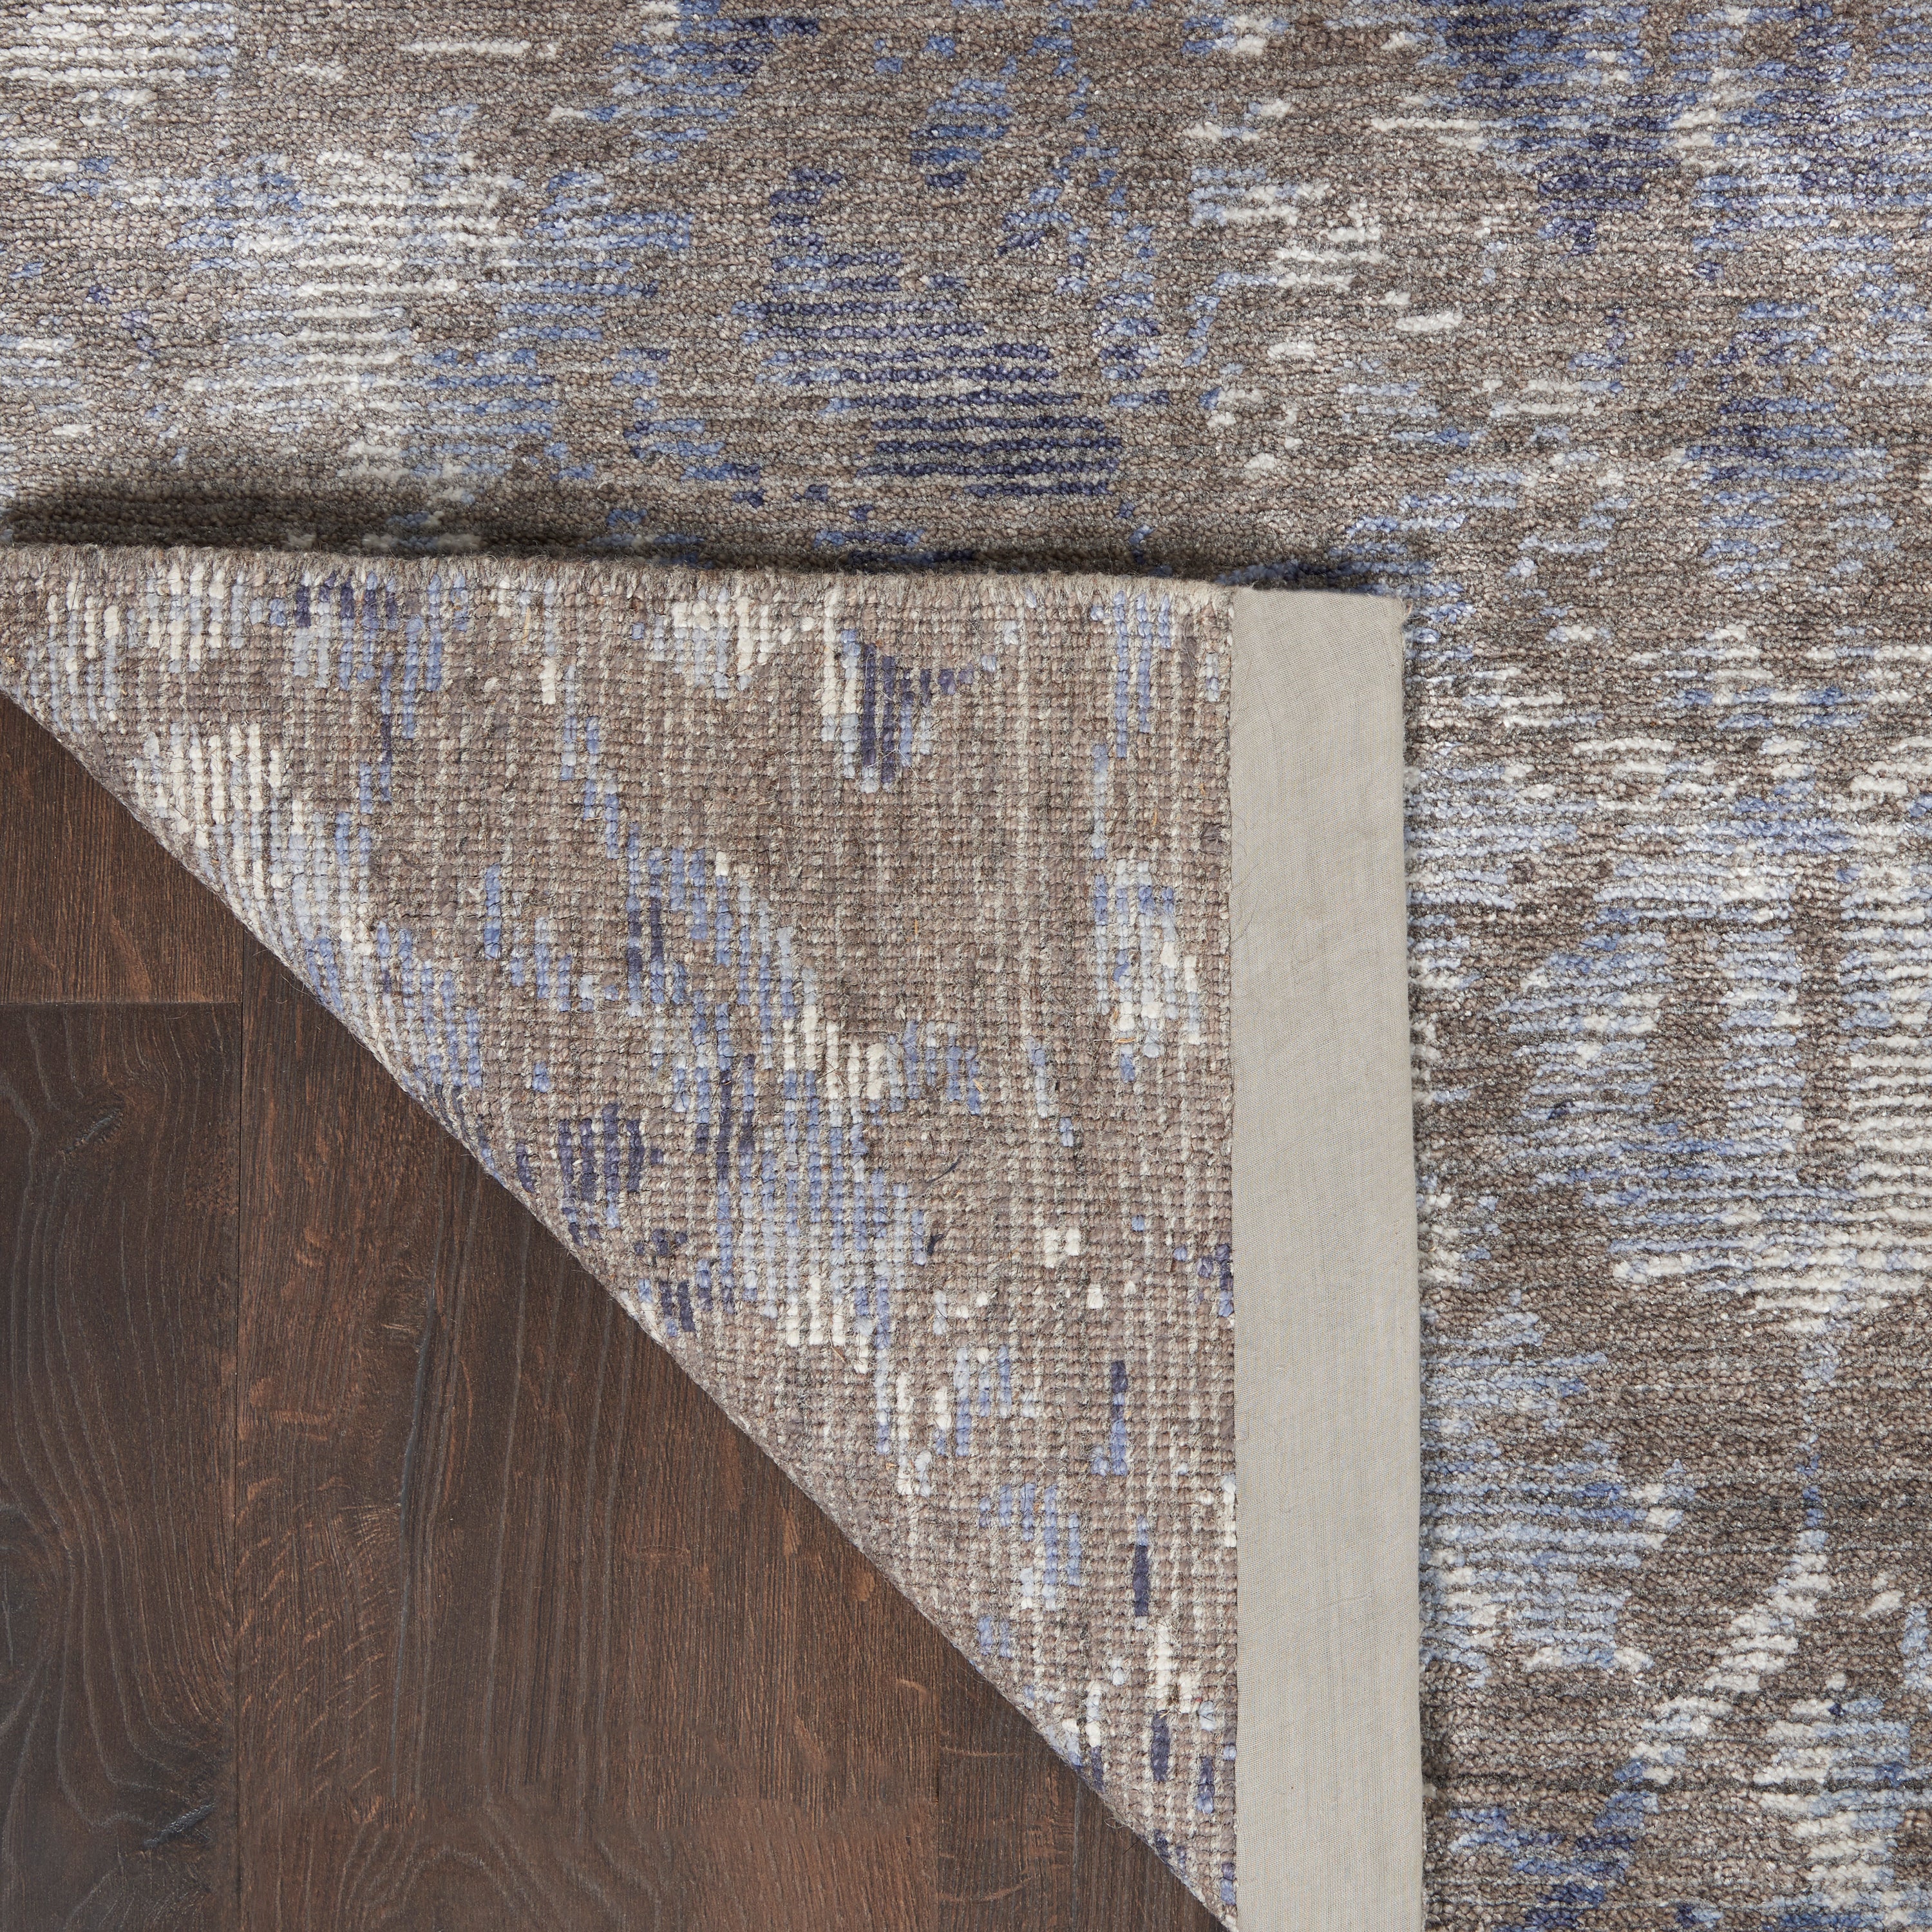 Close-up of a wood floor and abstract patterned rug corner.